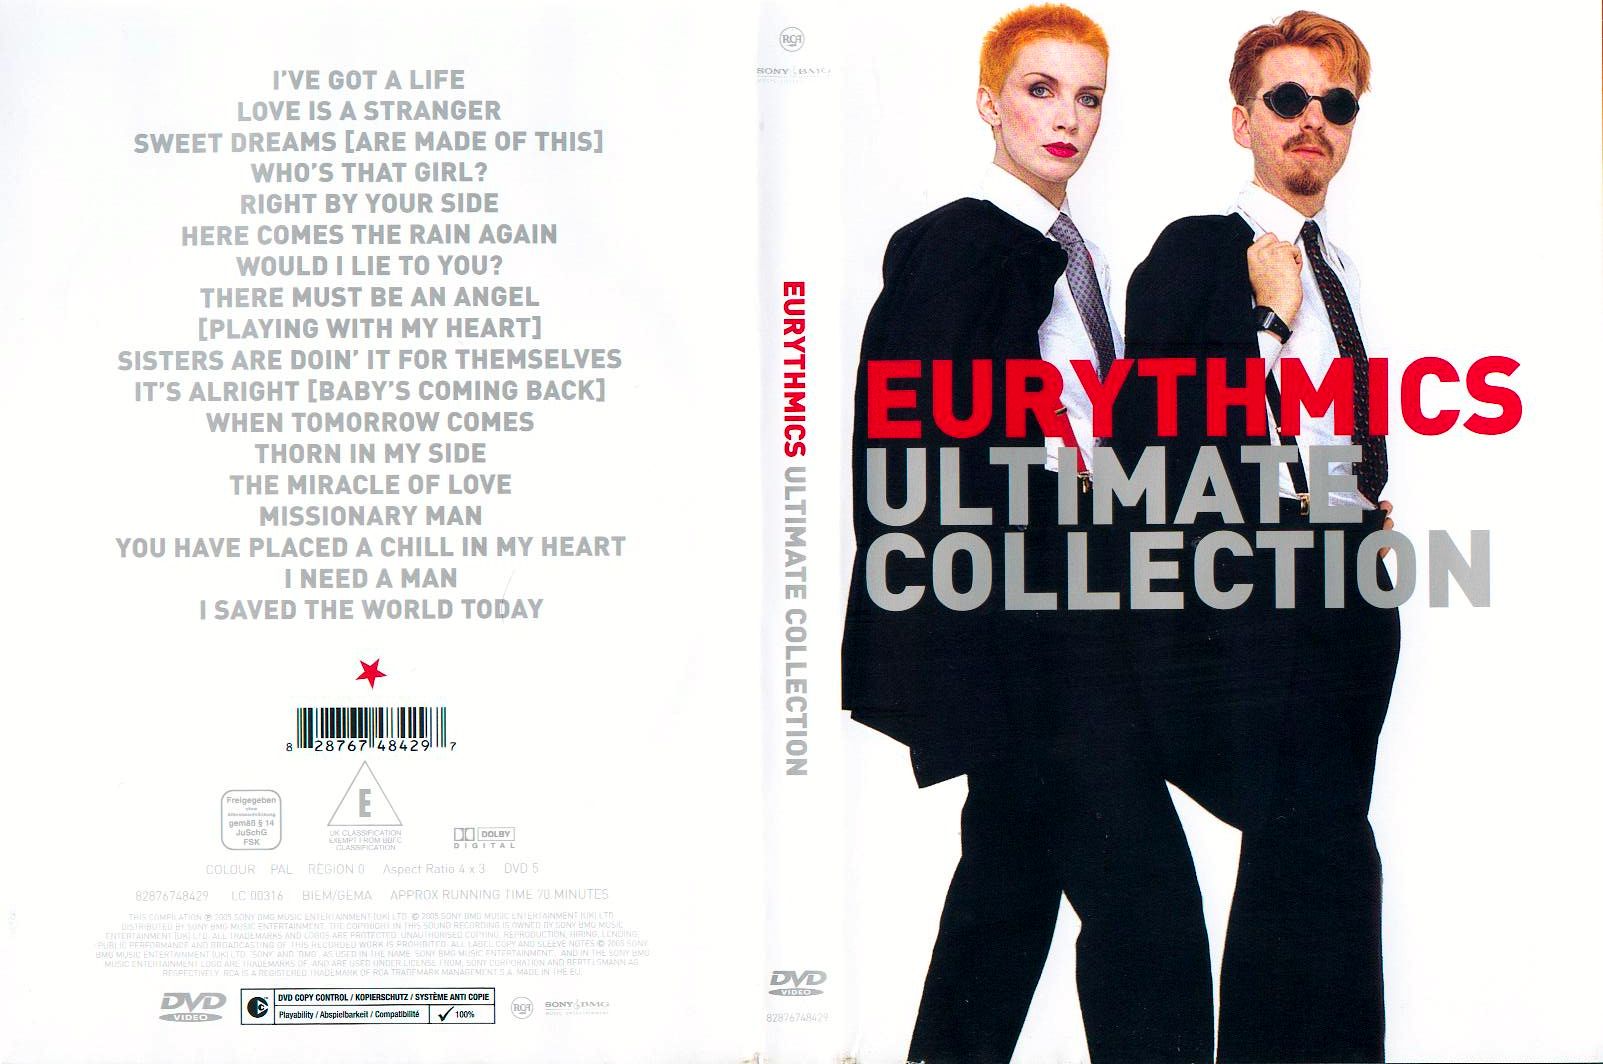 Jaquette DVD Eurythmics Ultimate Collection